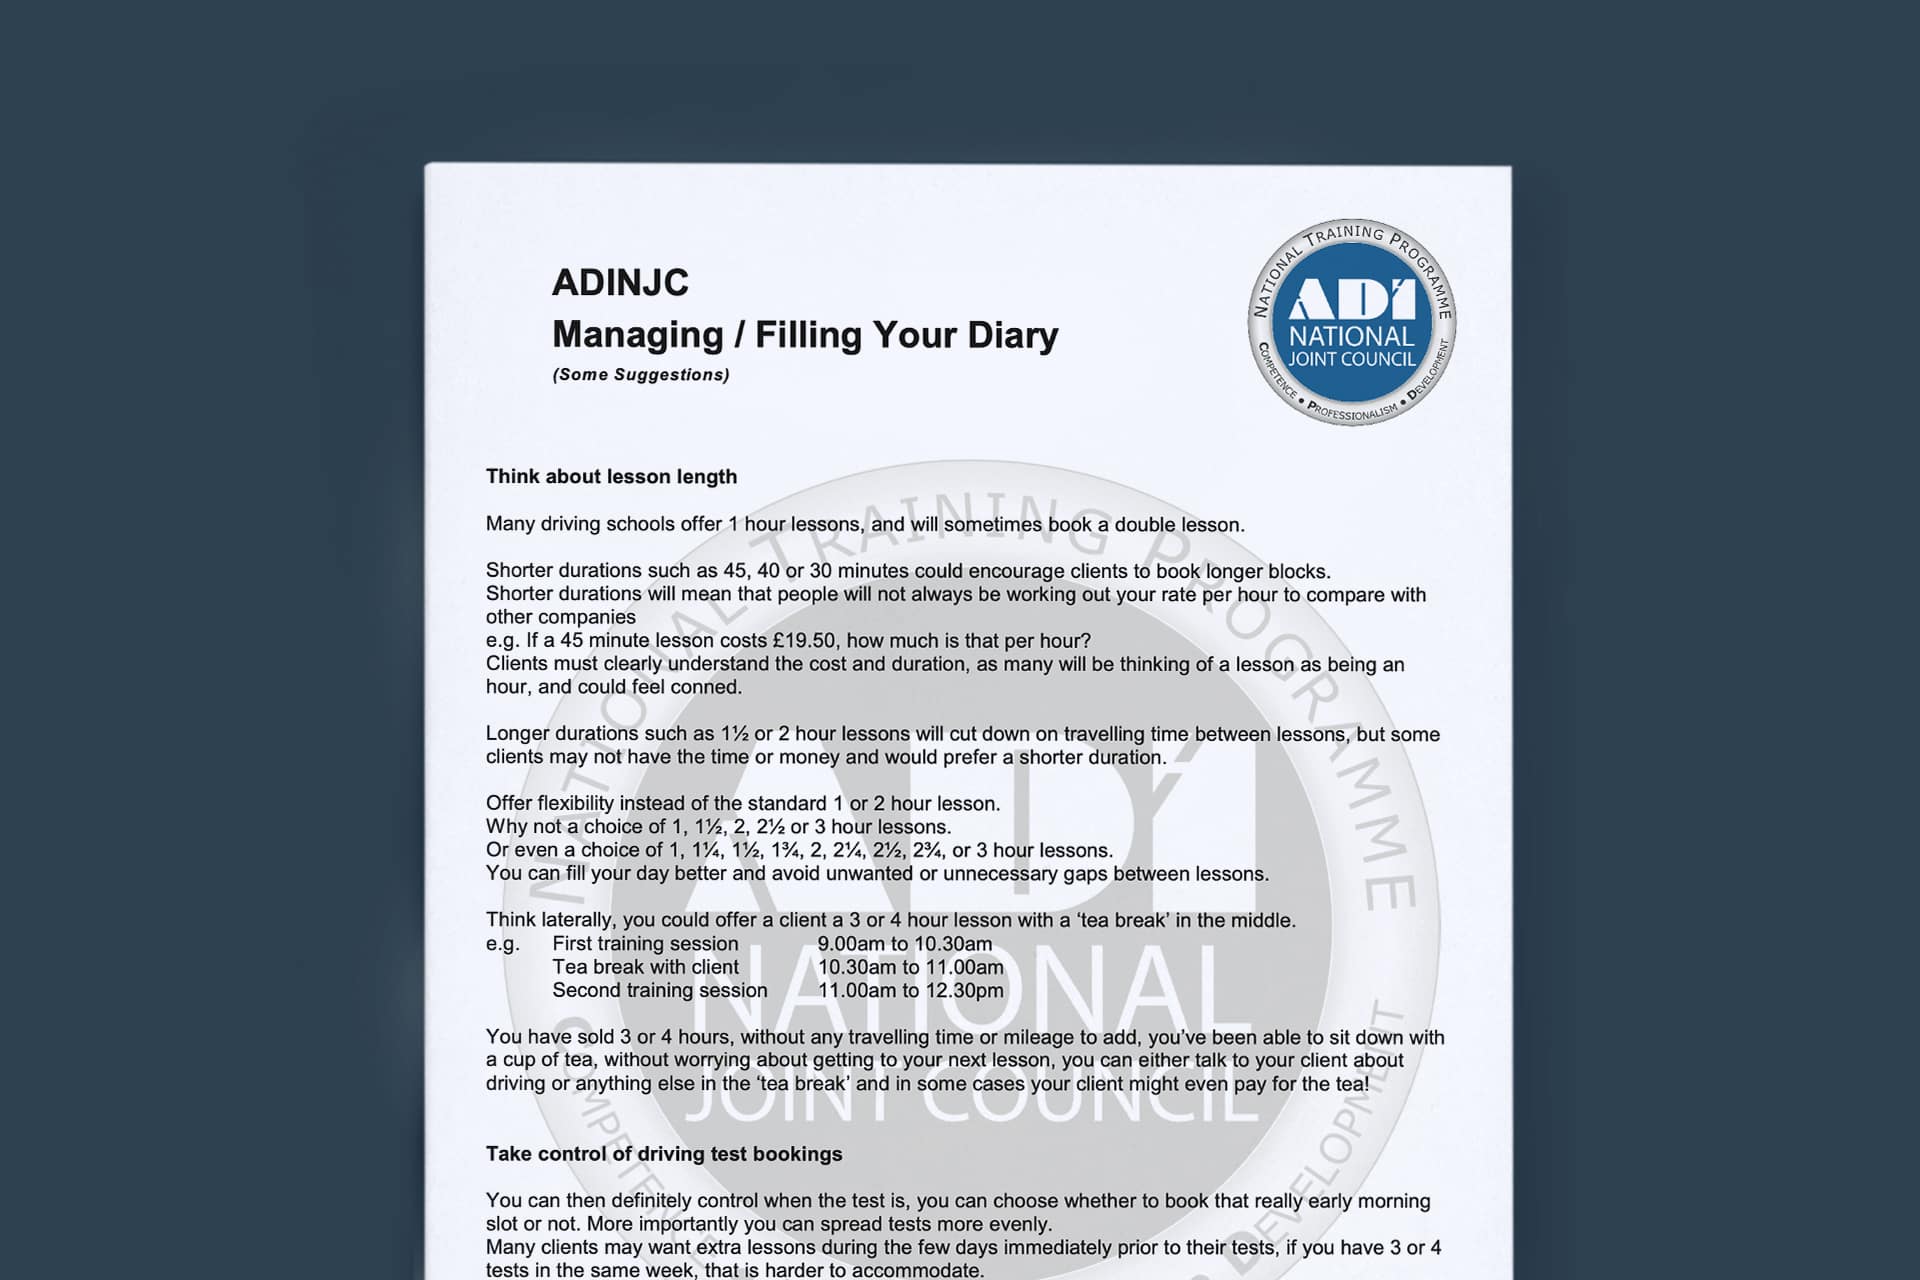 ADINJC Business Course – Managing Your Diary 2016